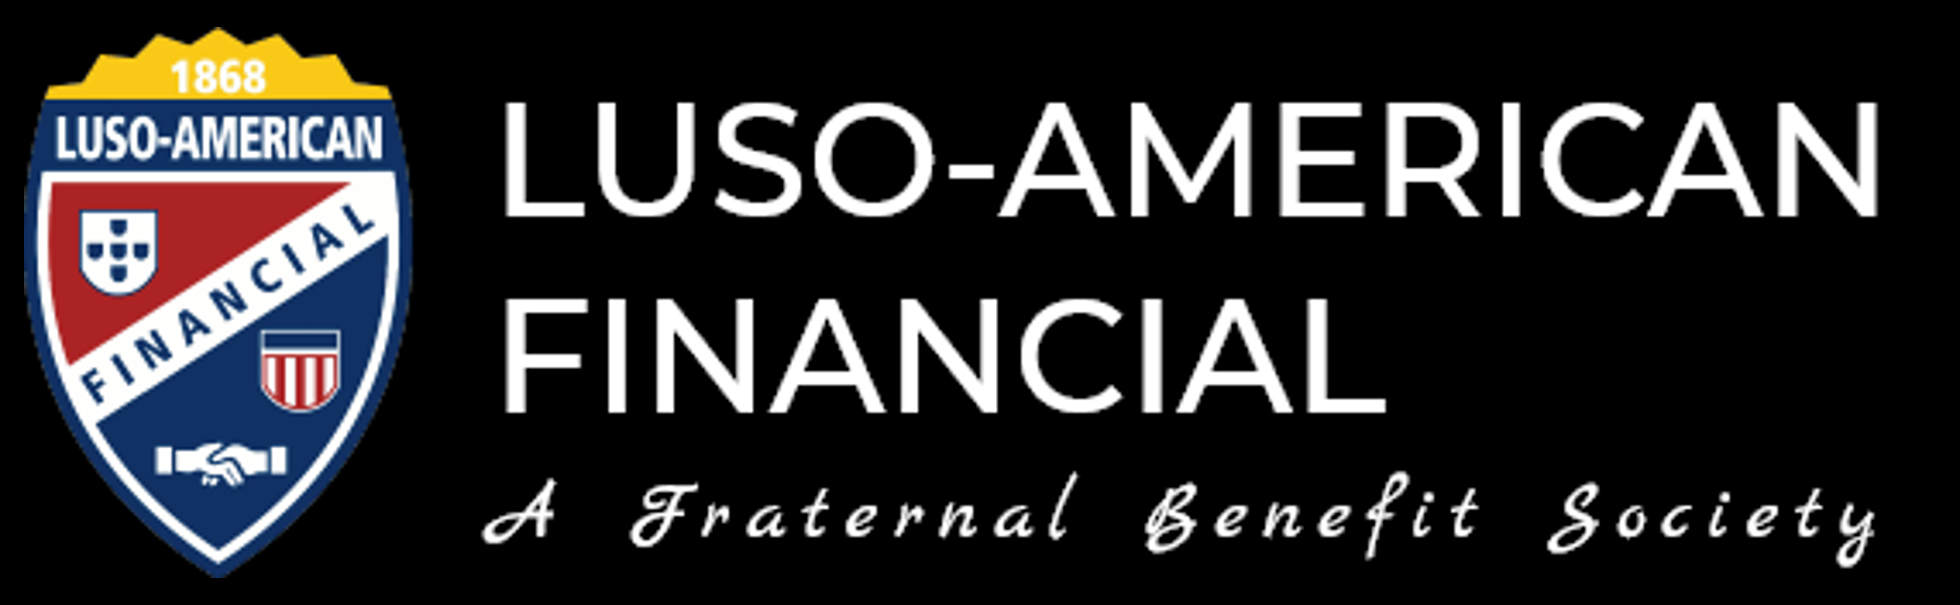 Luso-American Financial blk.png